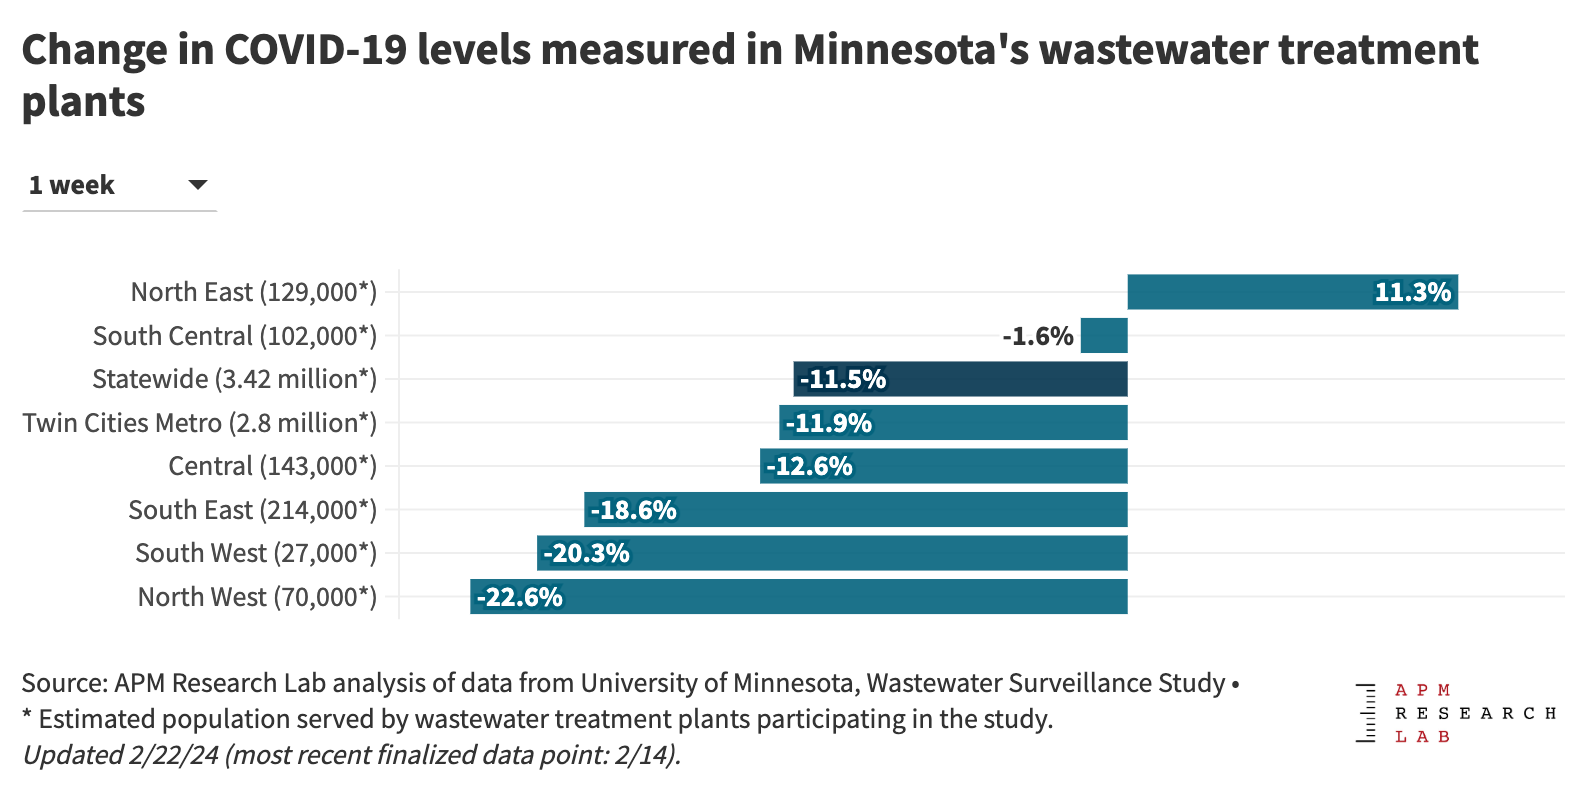 The statewide COVID-19 level measured in Minnesota's wastewater treatment plants are down in all parts of the state except the North East region